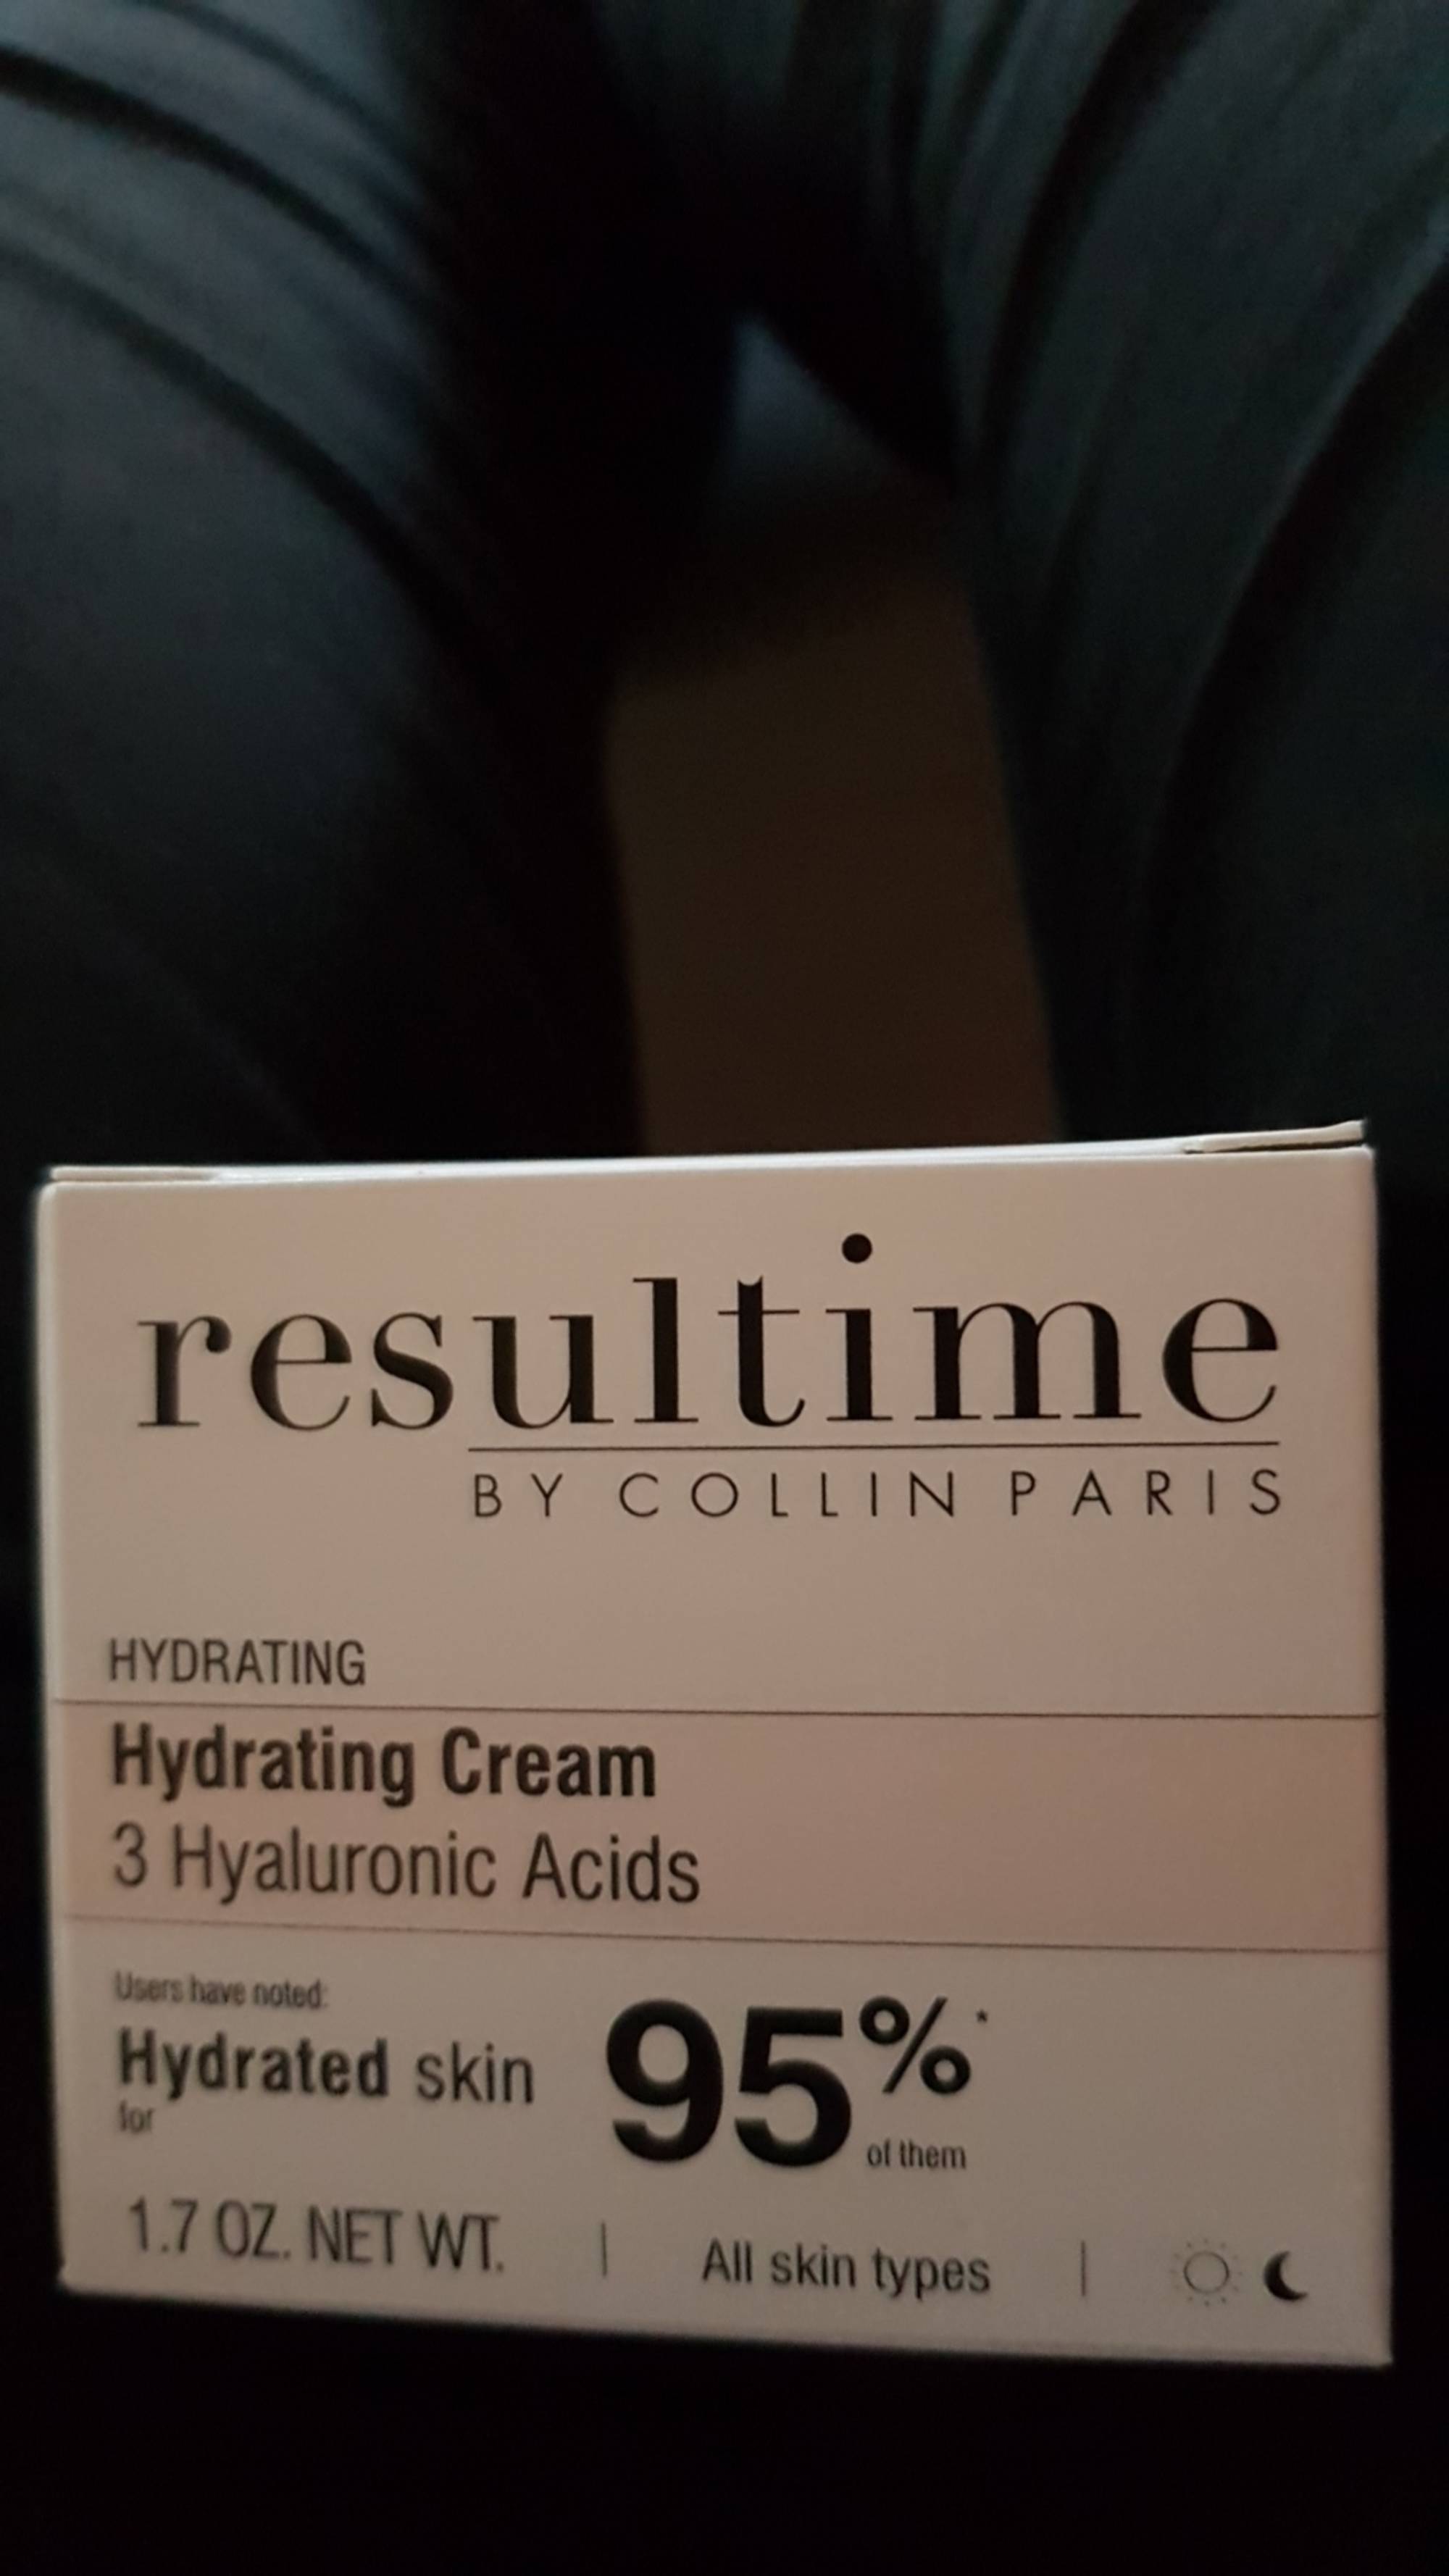 RESULTIME - Hydrating cream 3 hyaluronic acids 